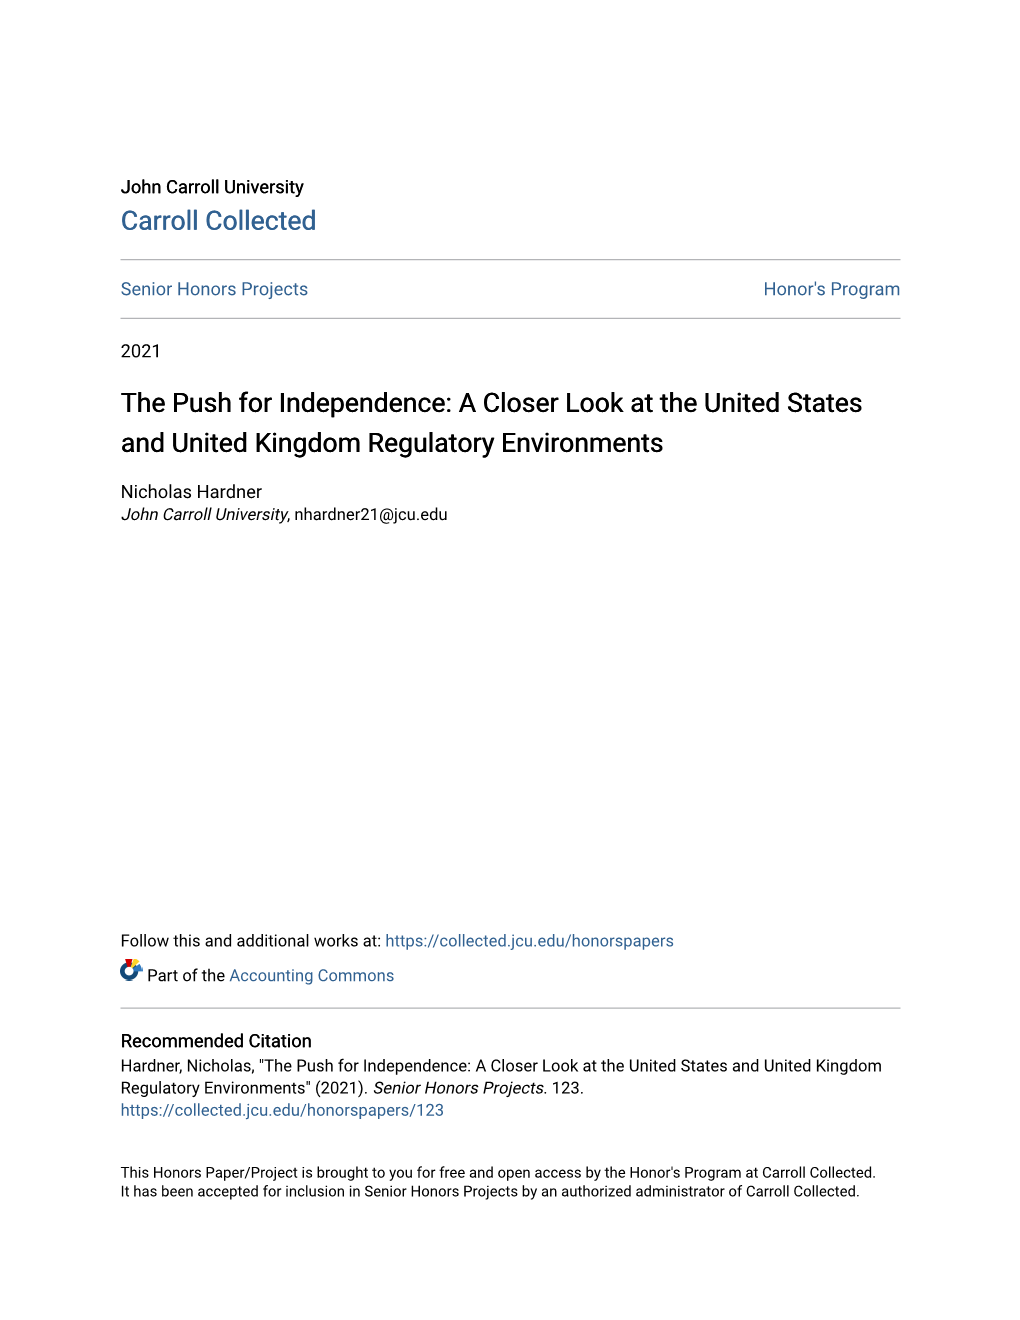 The Push for Independence: a Closer Look at the United States and United Kingdom Regulatory Environments